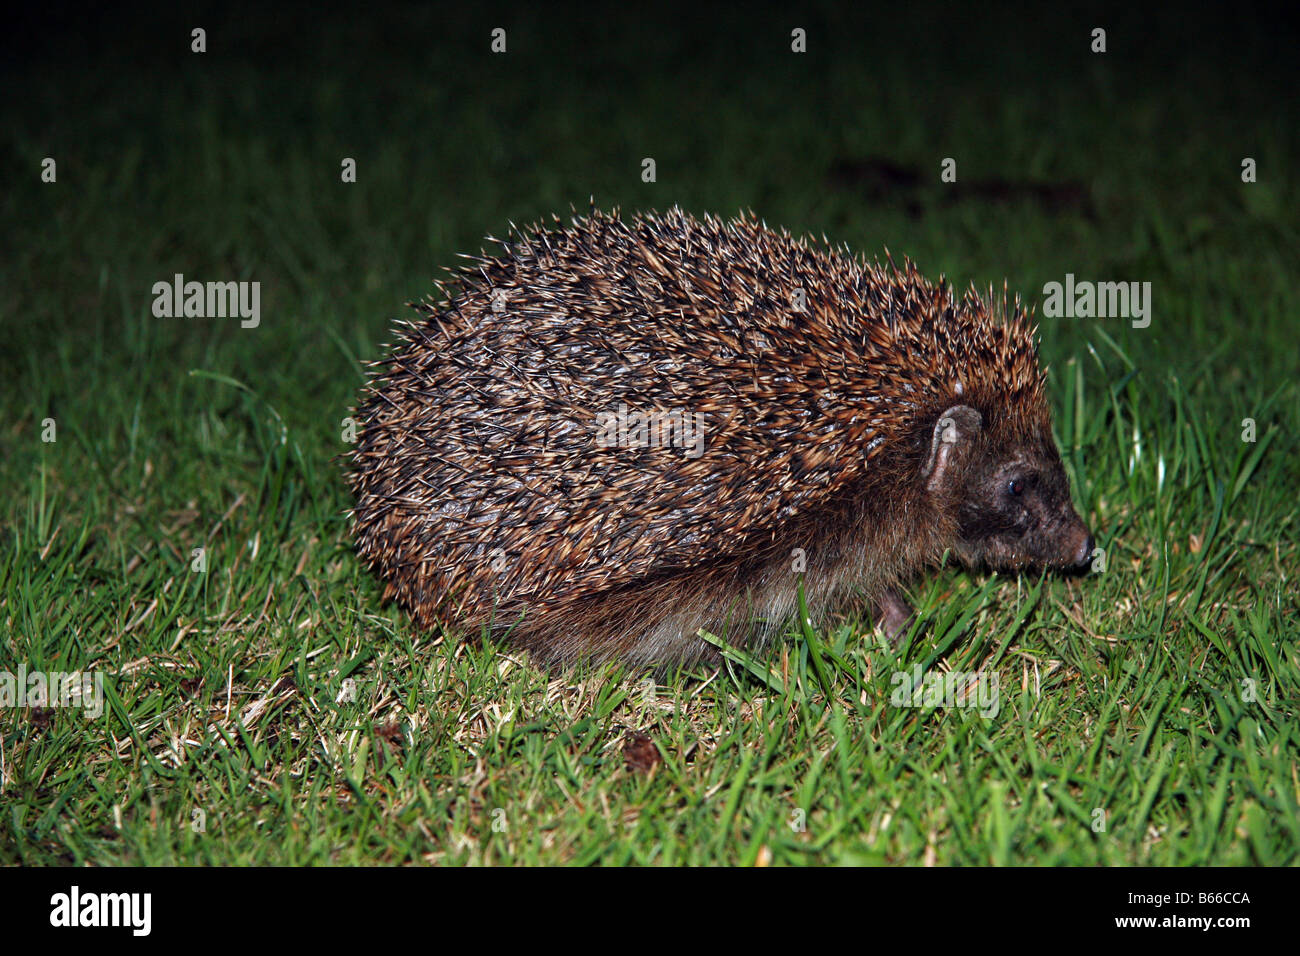 Young hedgehog (Western Hedgehog) (European Hedgehog) alone on the grass at night, flash used Stock Photo